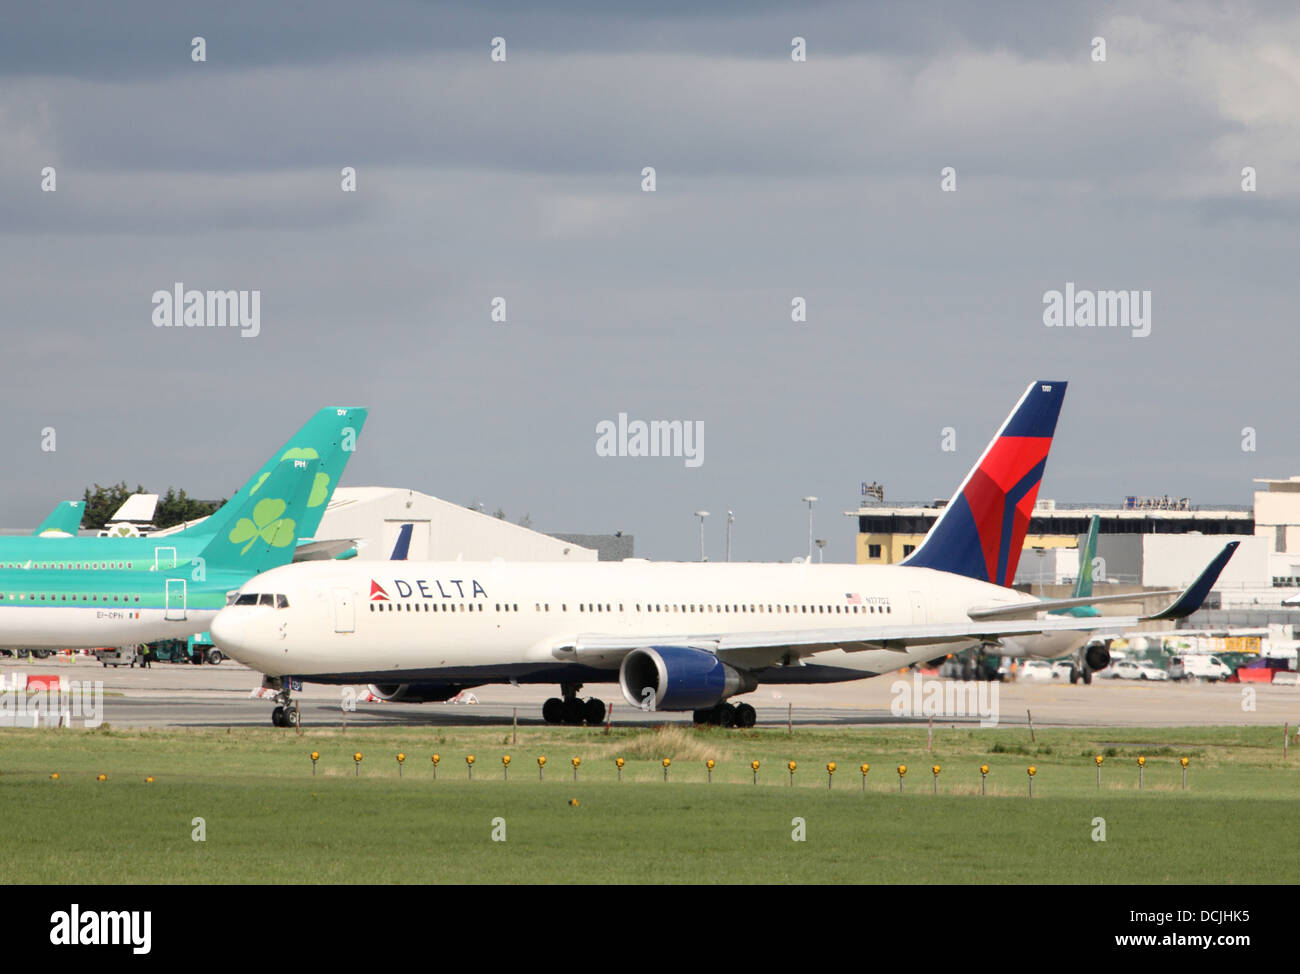 Delta airlines ready for take off at Dublin Airport Stock Photo